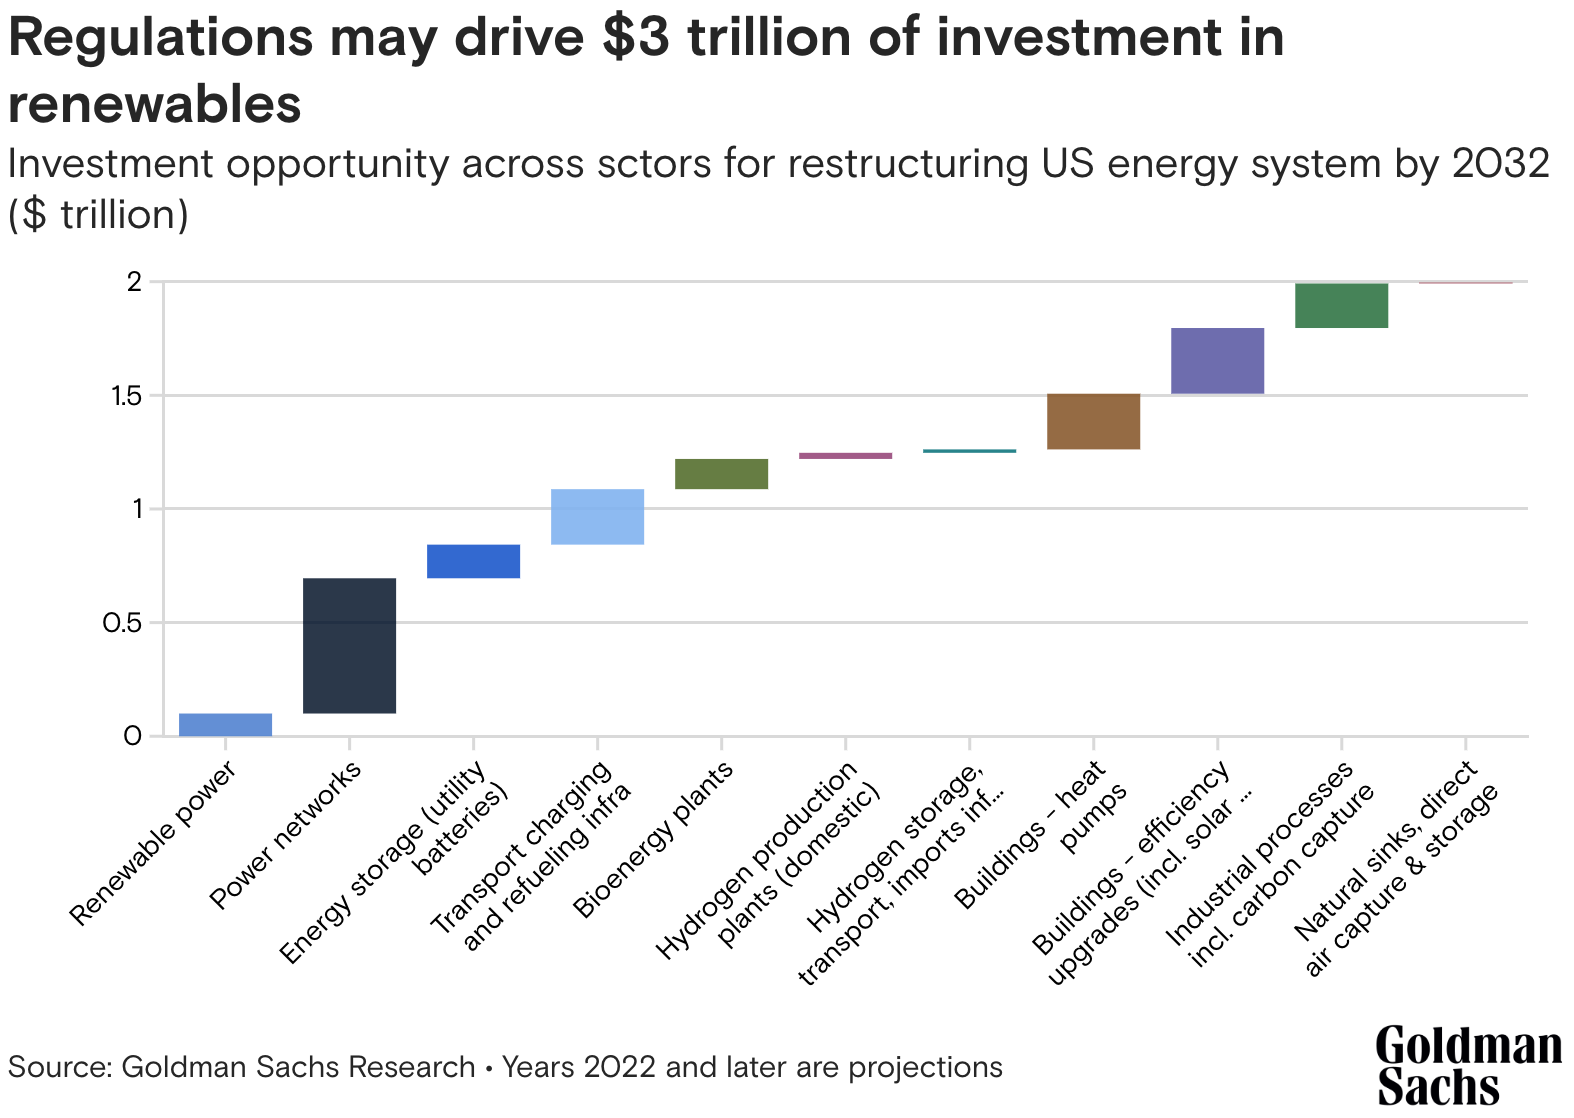 Goldman Sachs report finds new laws will drive $3 trillion of investment in renewables.